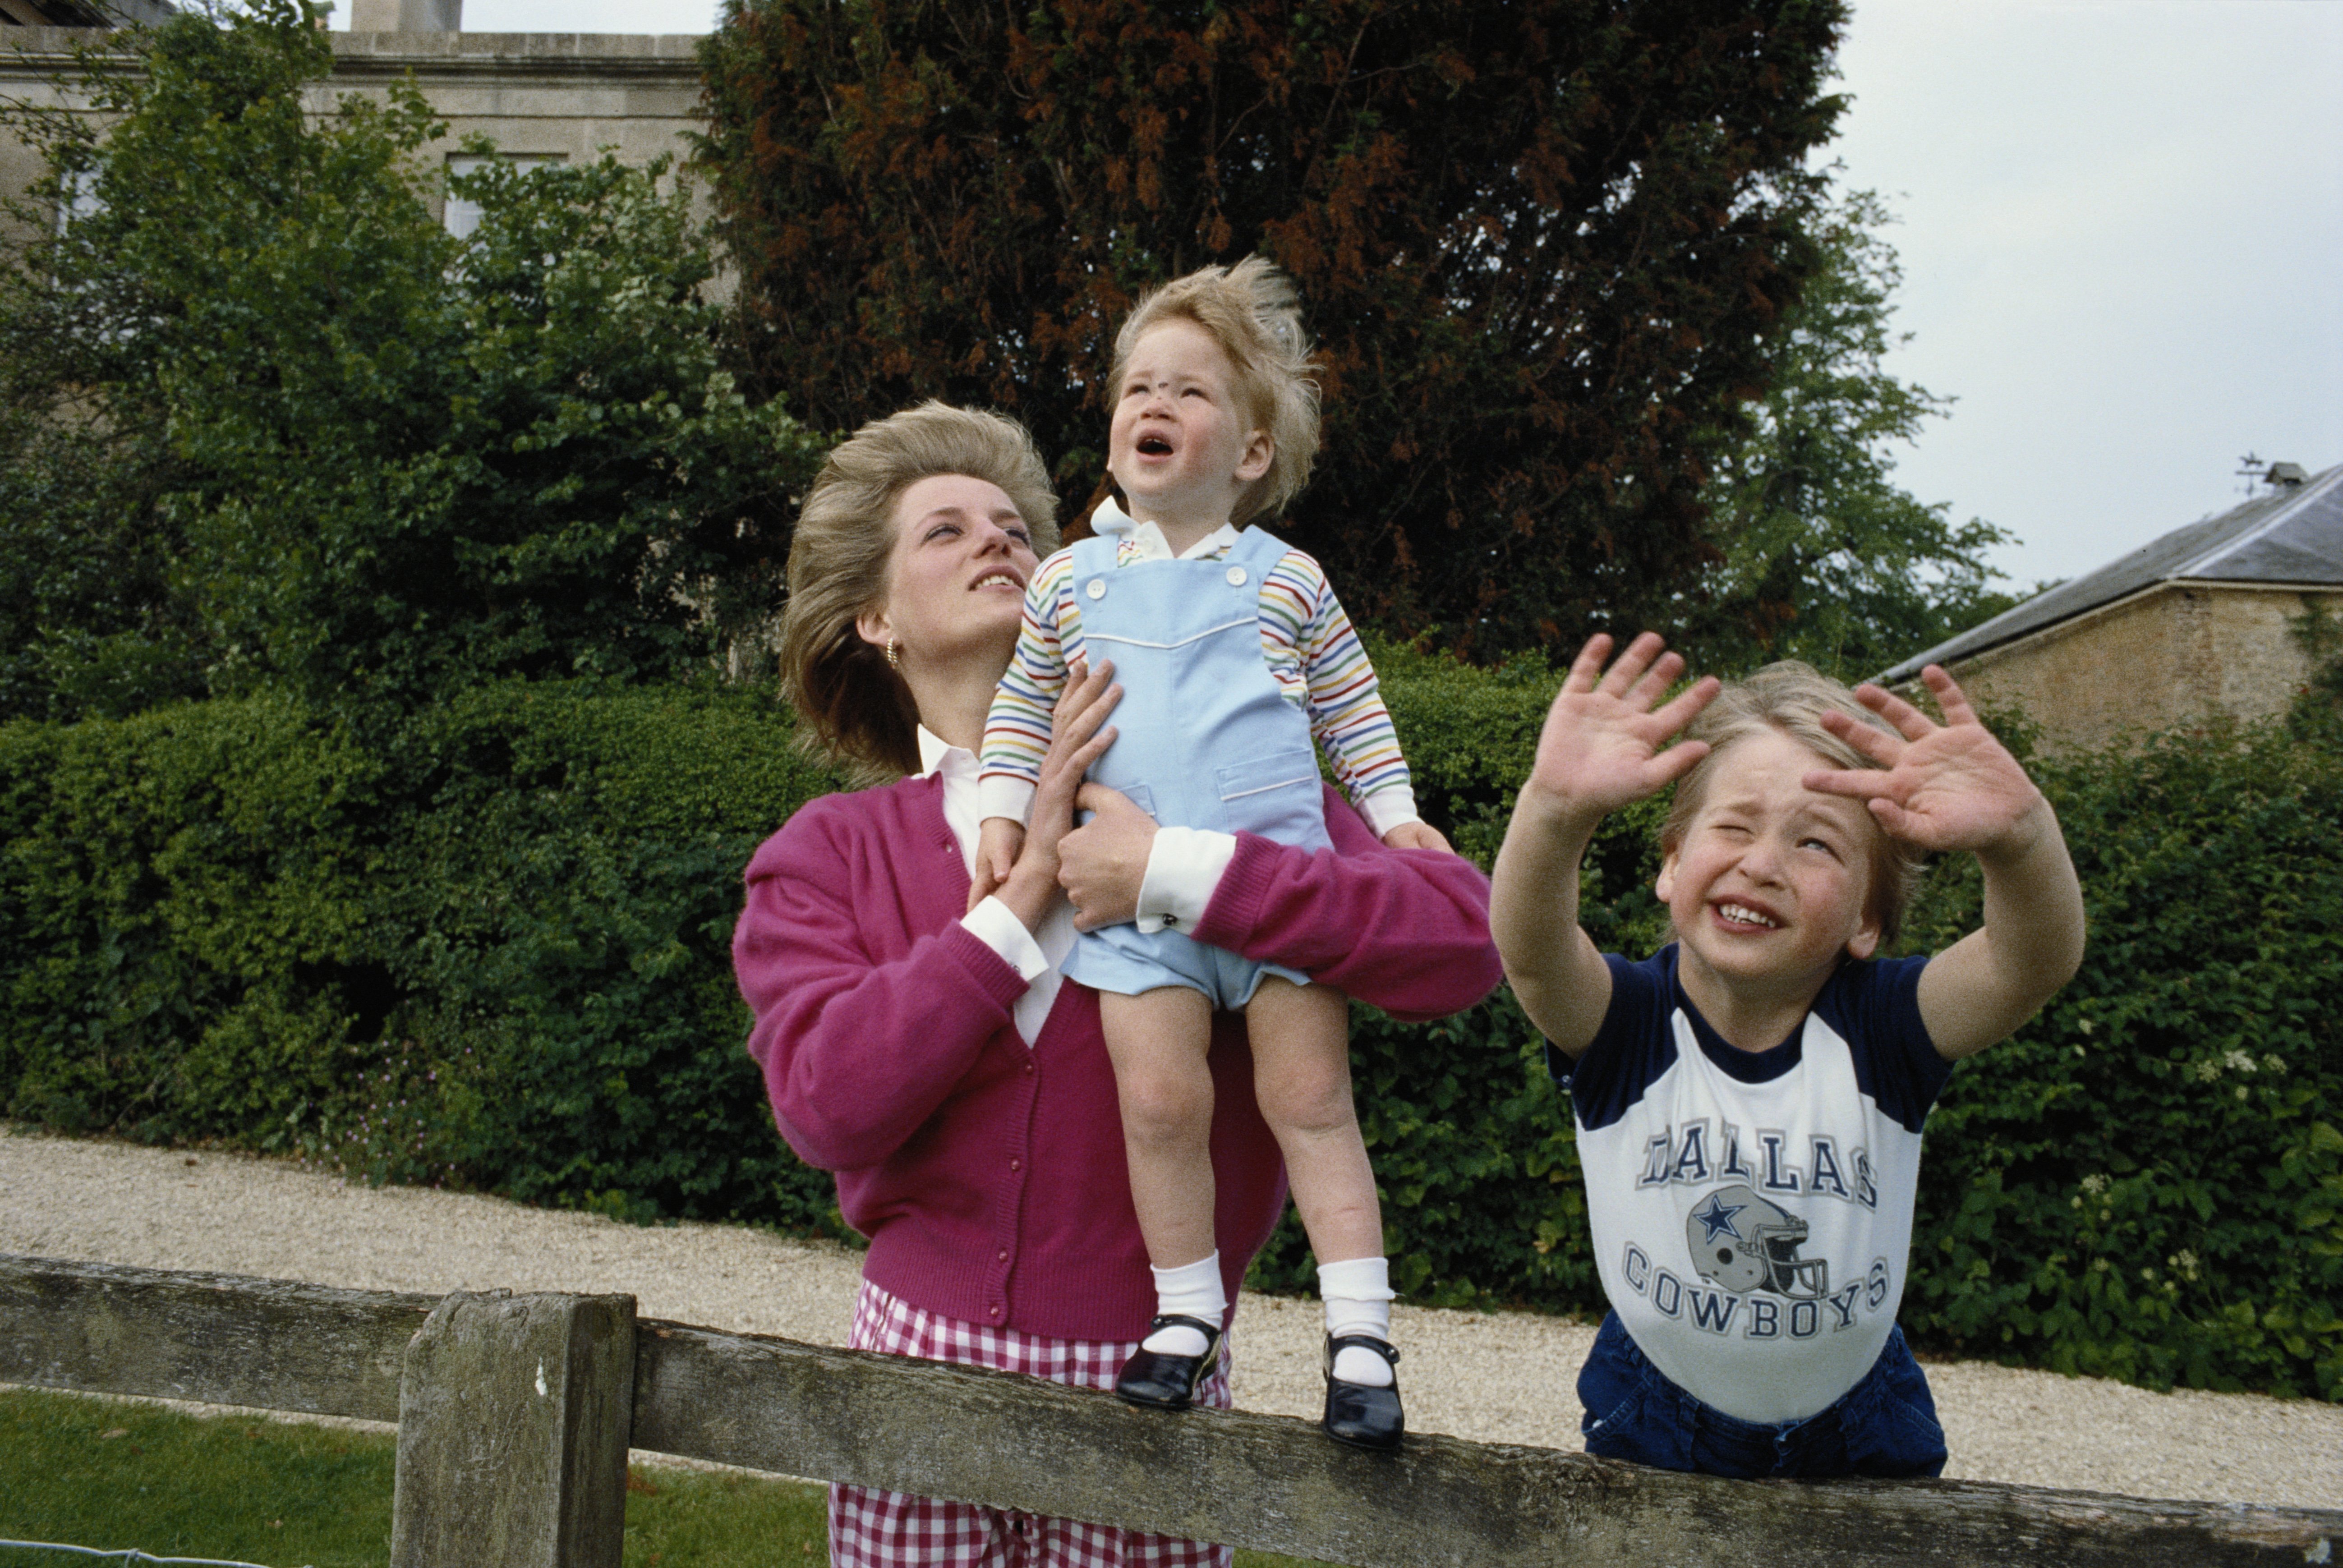 Princes William and Prince Harry with their mother, Princess Diana in the garden of Highgrove House in Gloucestershire, on July 18, 1986 | Source: Getty Images